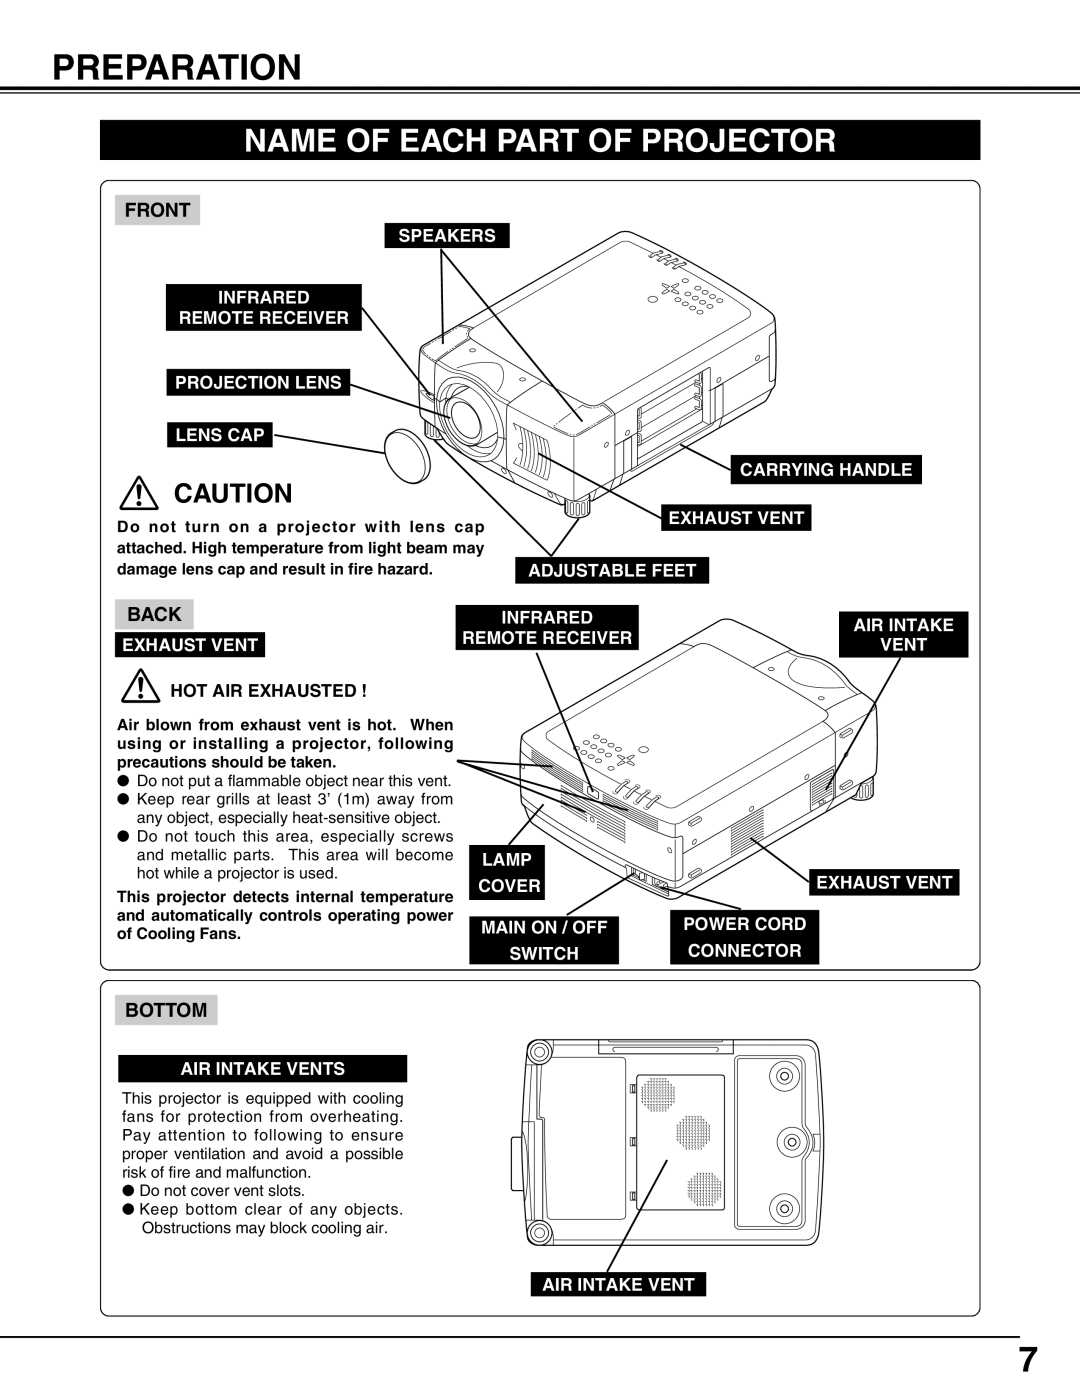 Eiki LC-SX4LA instruction manual Preparation, Name Of Each Part Of Projector, Front, Bottom 